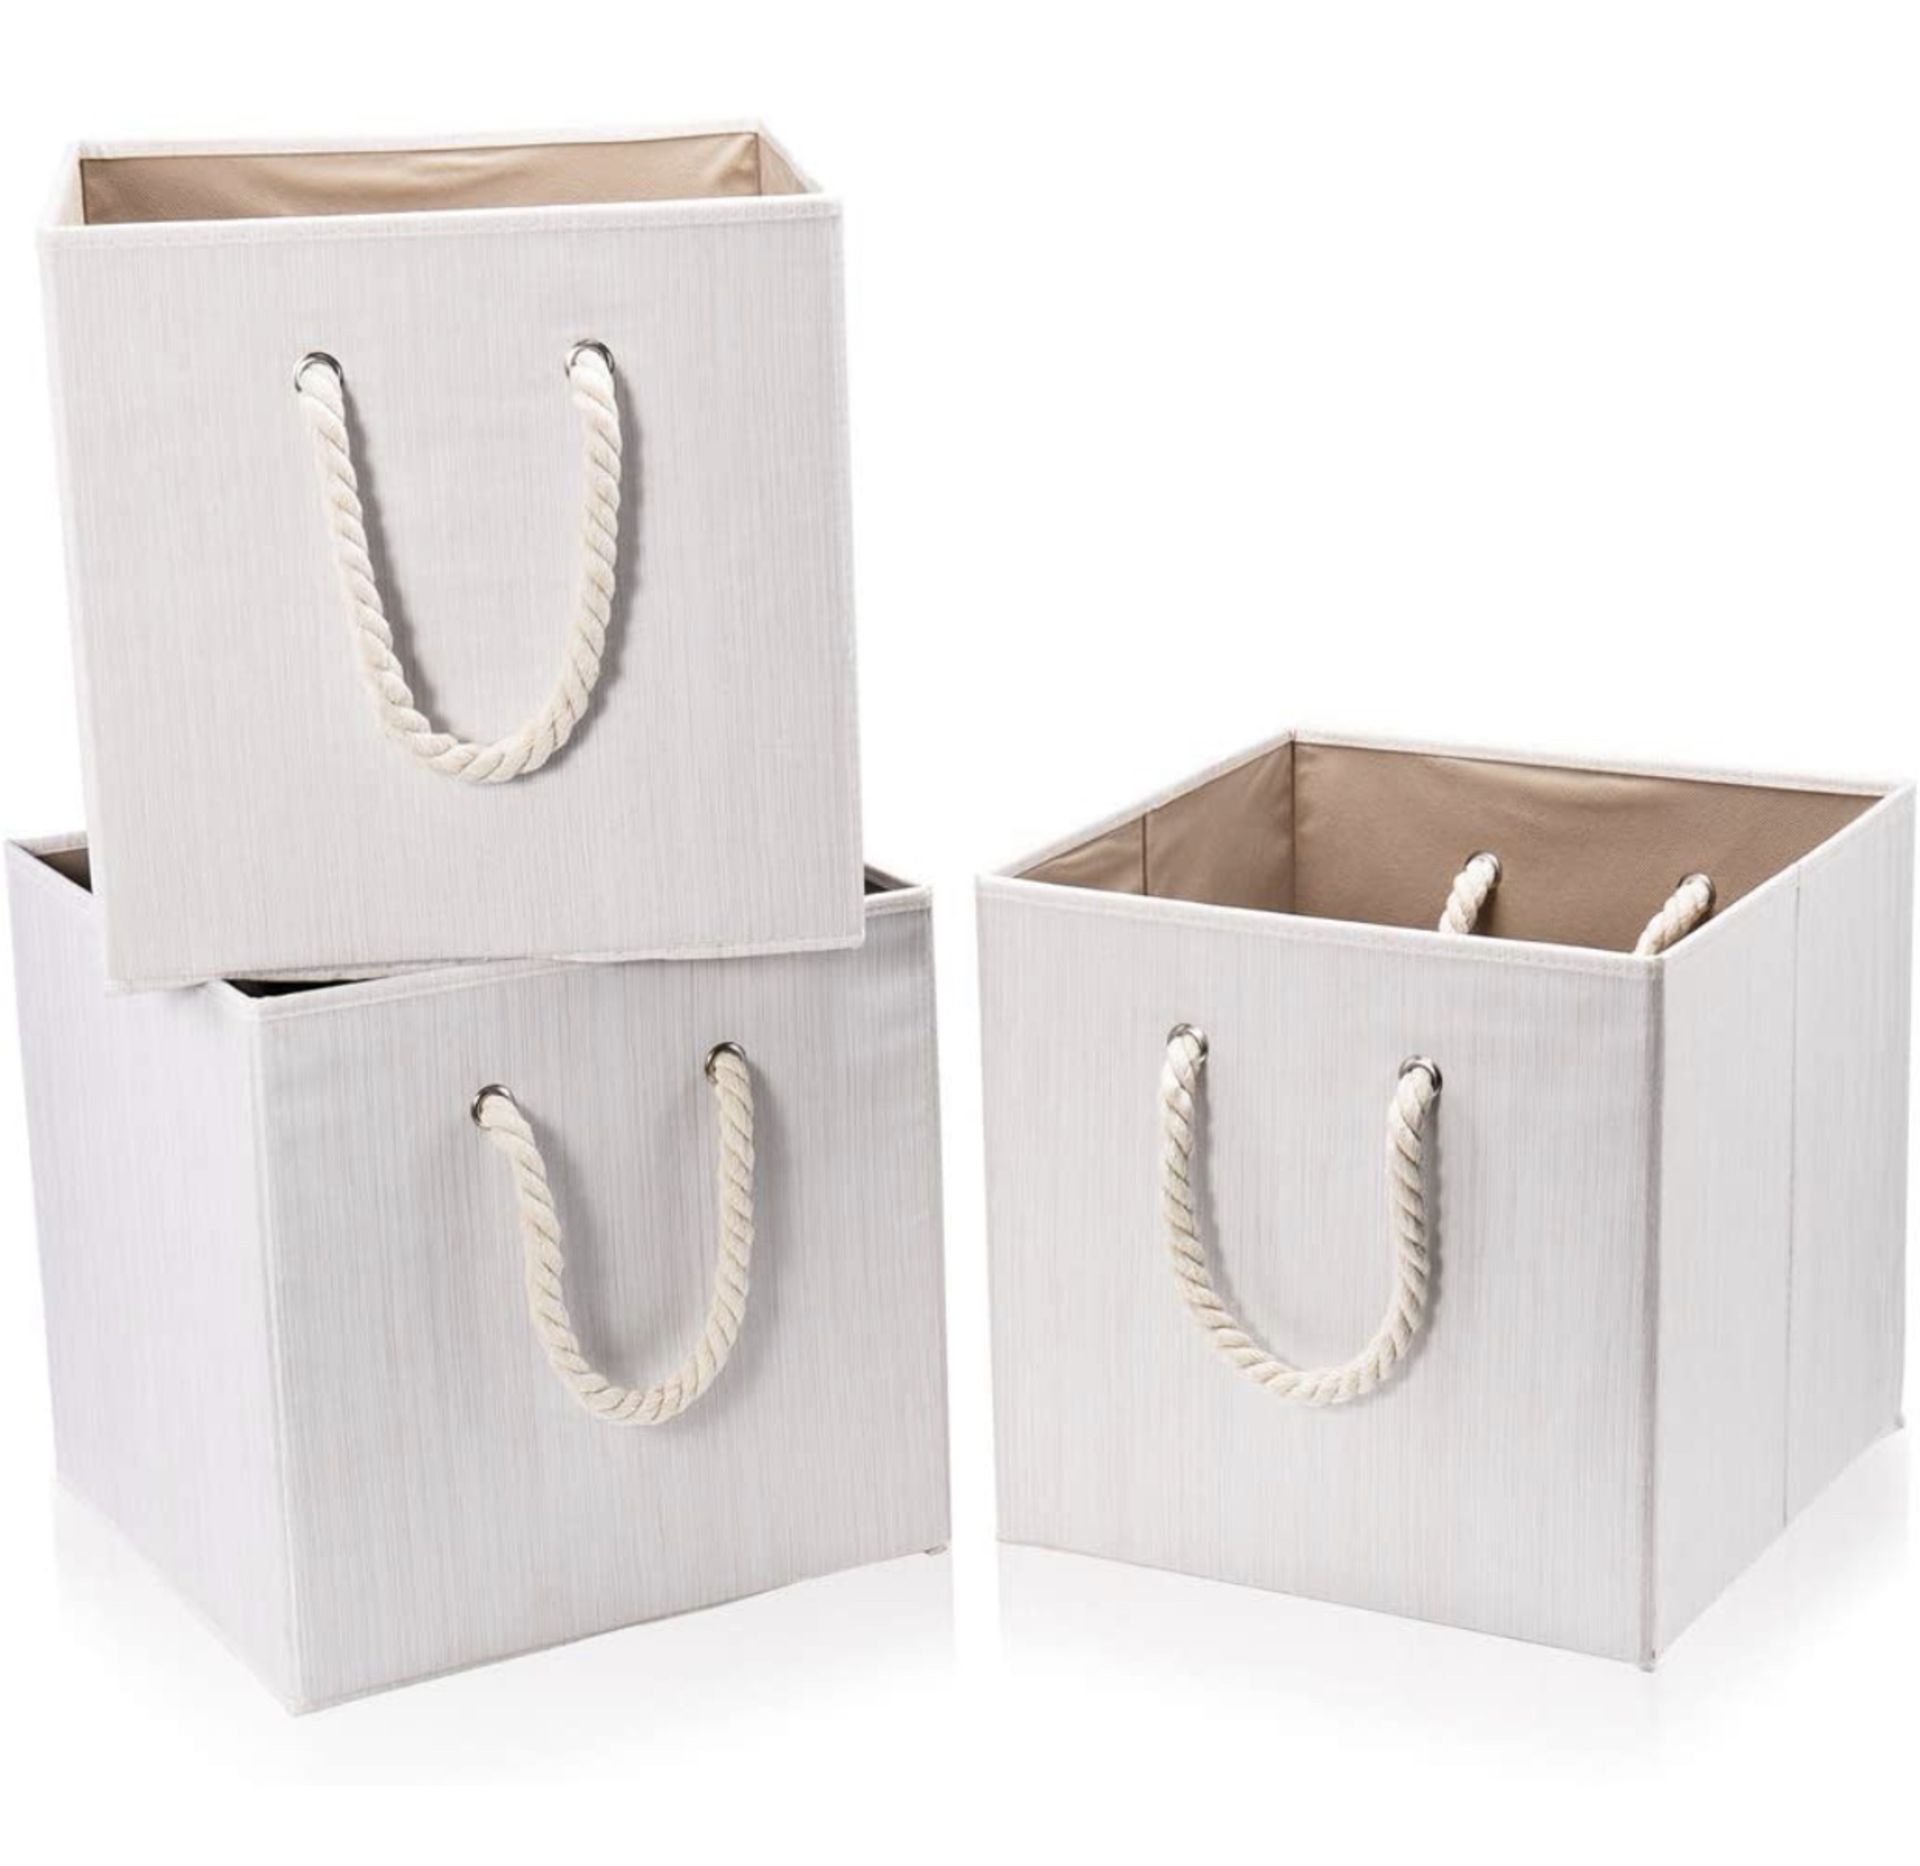 RRP £24.99 Robuy Storage Cube Basket Set of 3 Foldable Canvas Fabric Boxes Cotton Rope Handles